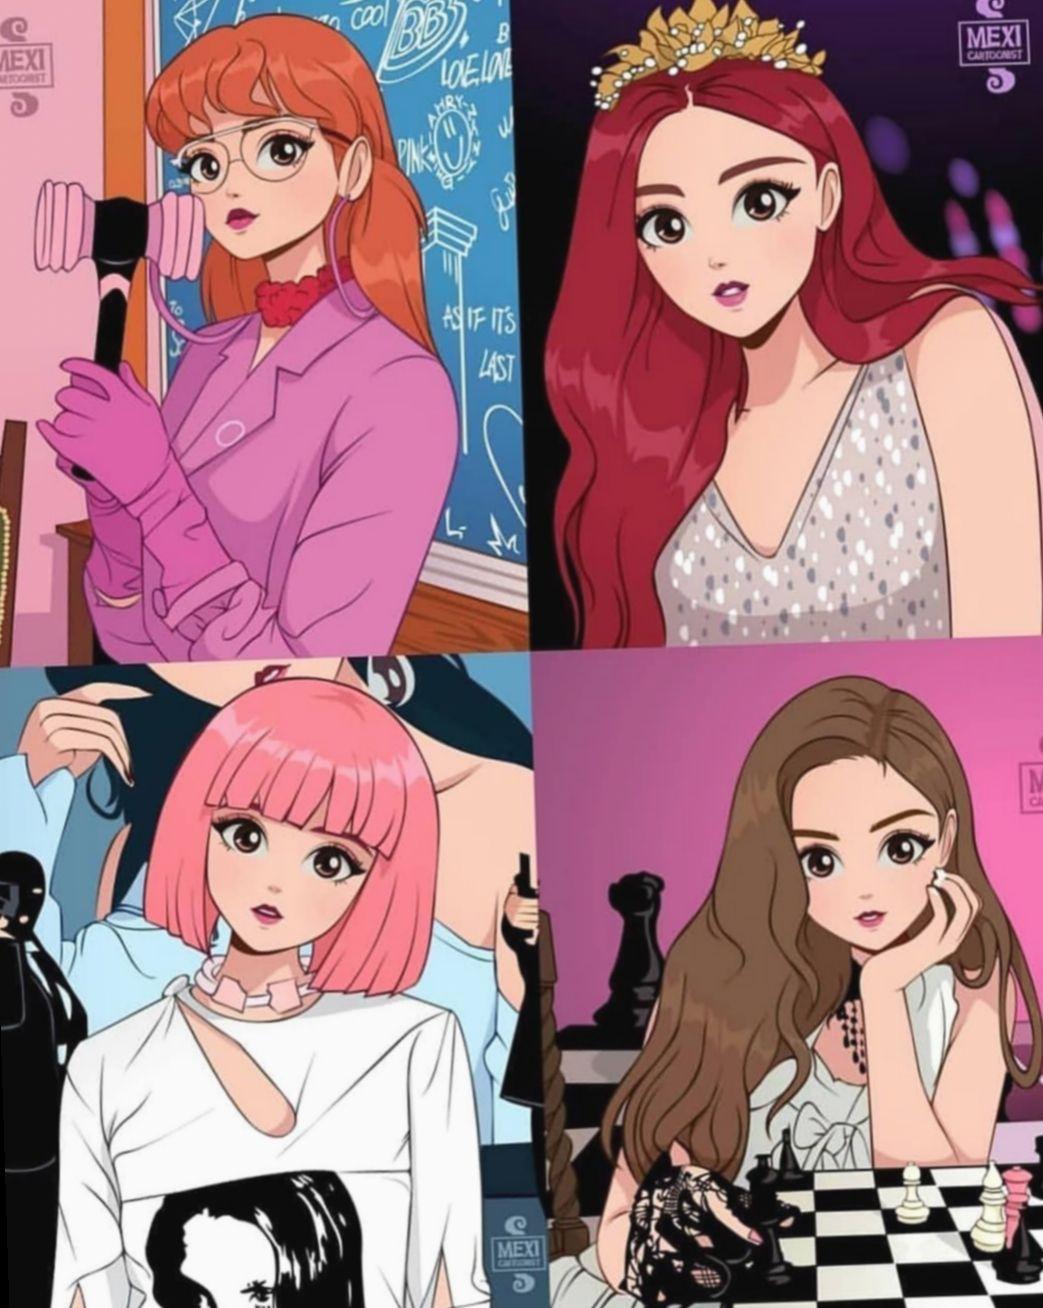 BLACKPINK FANS CLUB | Who is beautiful in anime pic